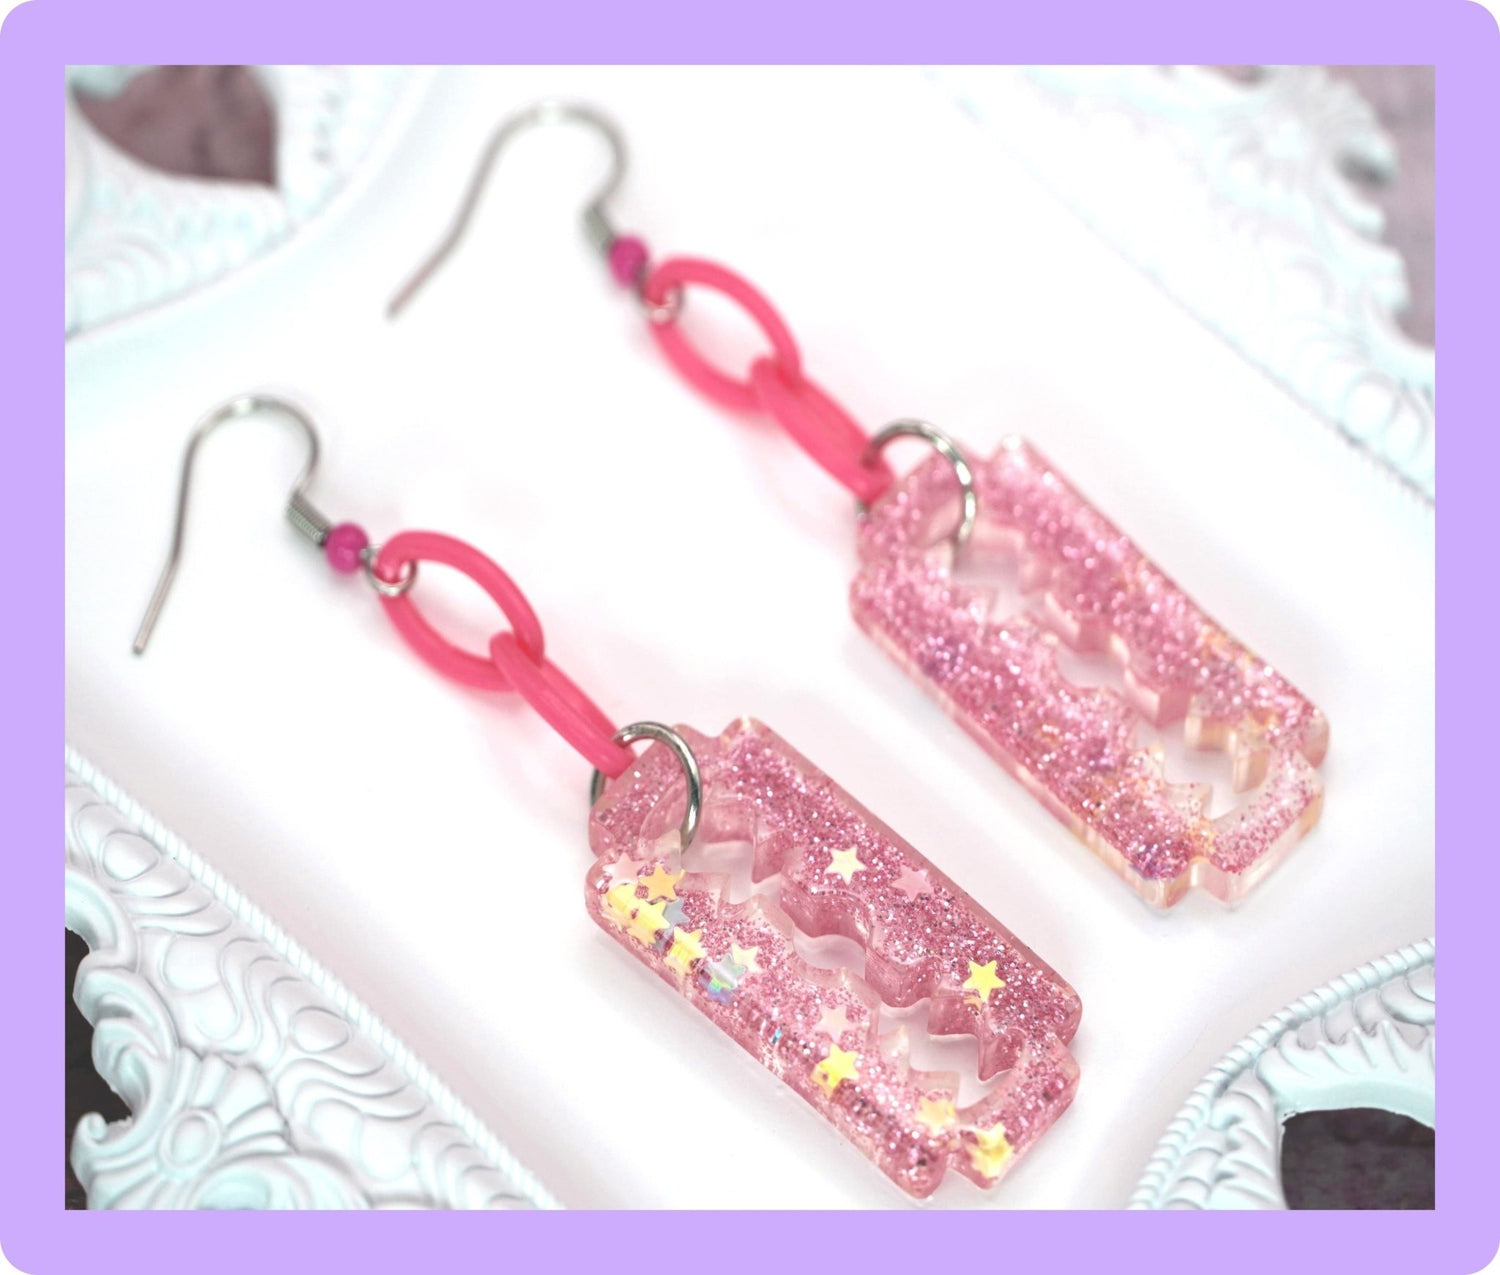 Pink Sparkly Razorblade Earrings with Acrylic Pink Chains and Pink Accented Stainless Steel Earring Hooks, YamiKawaii/Menehara Kei Fashion - Dekowaii Jewelry Company